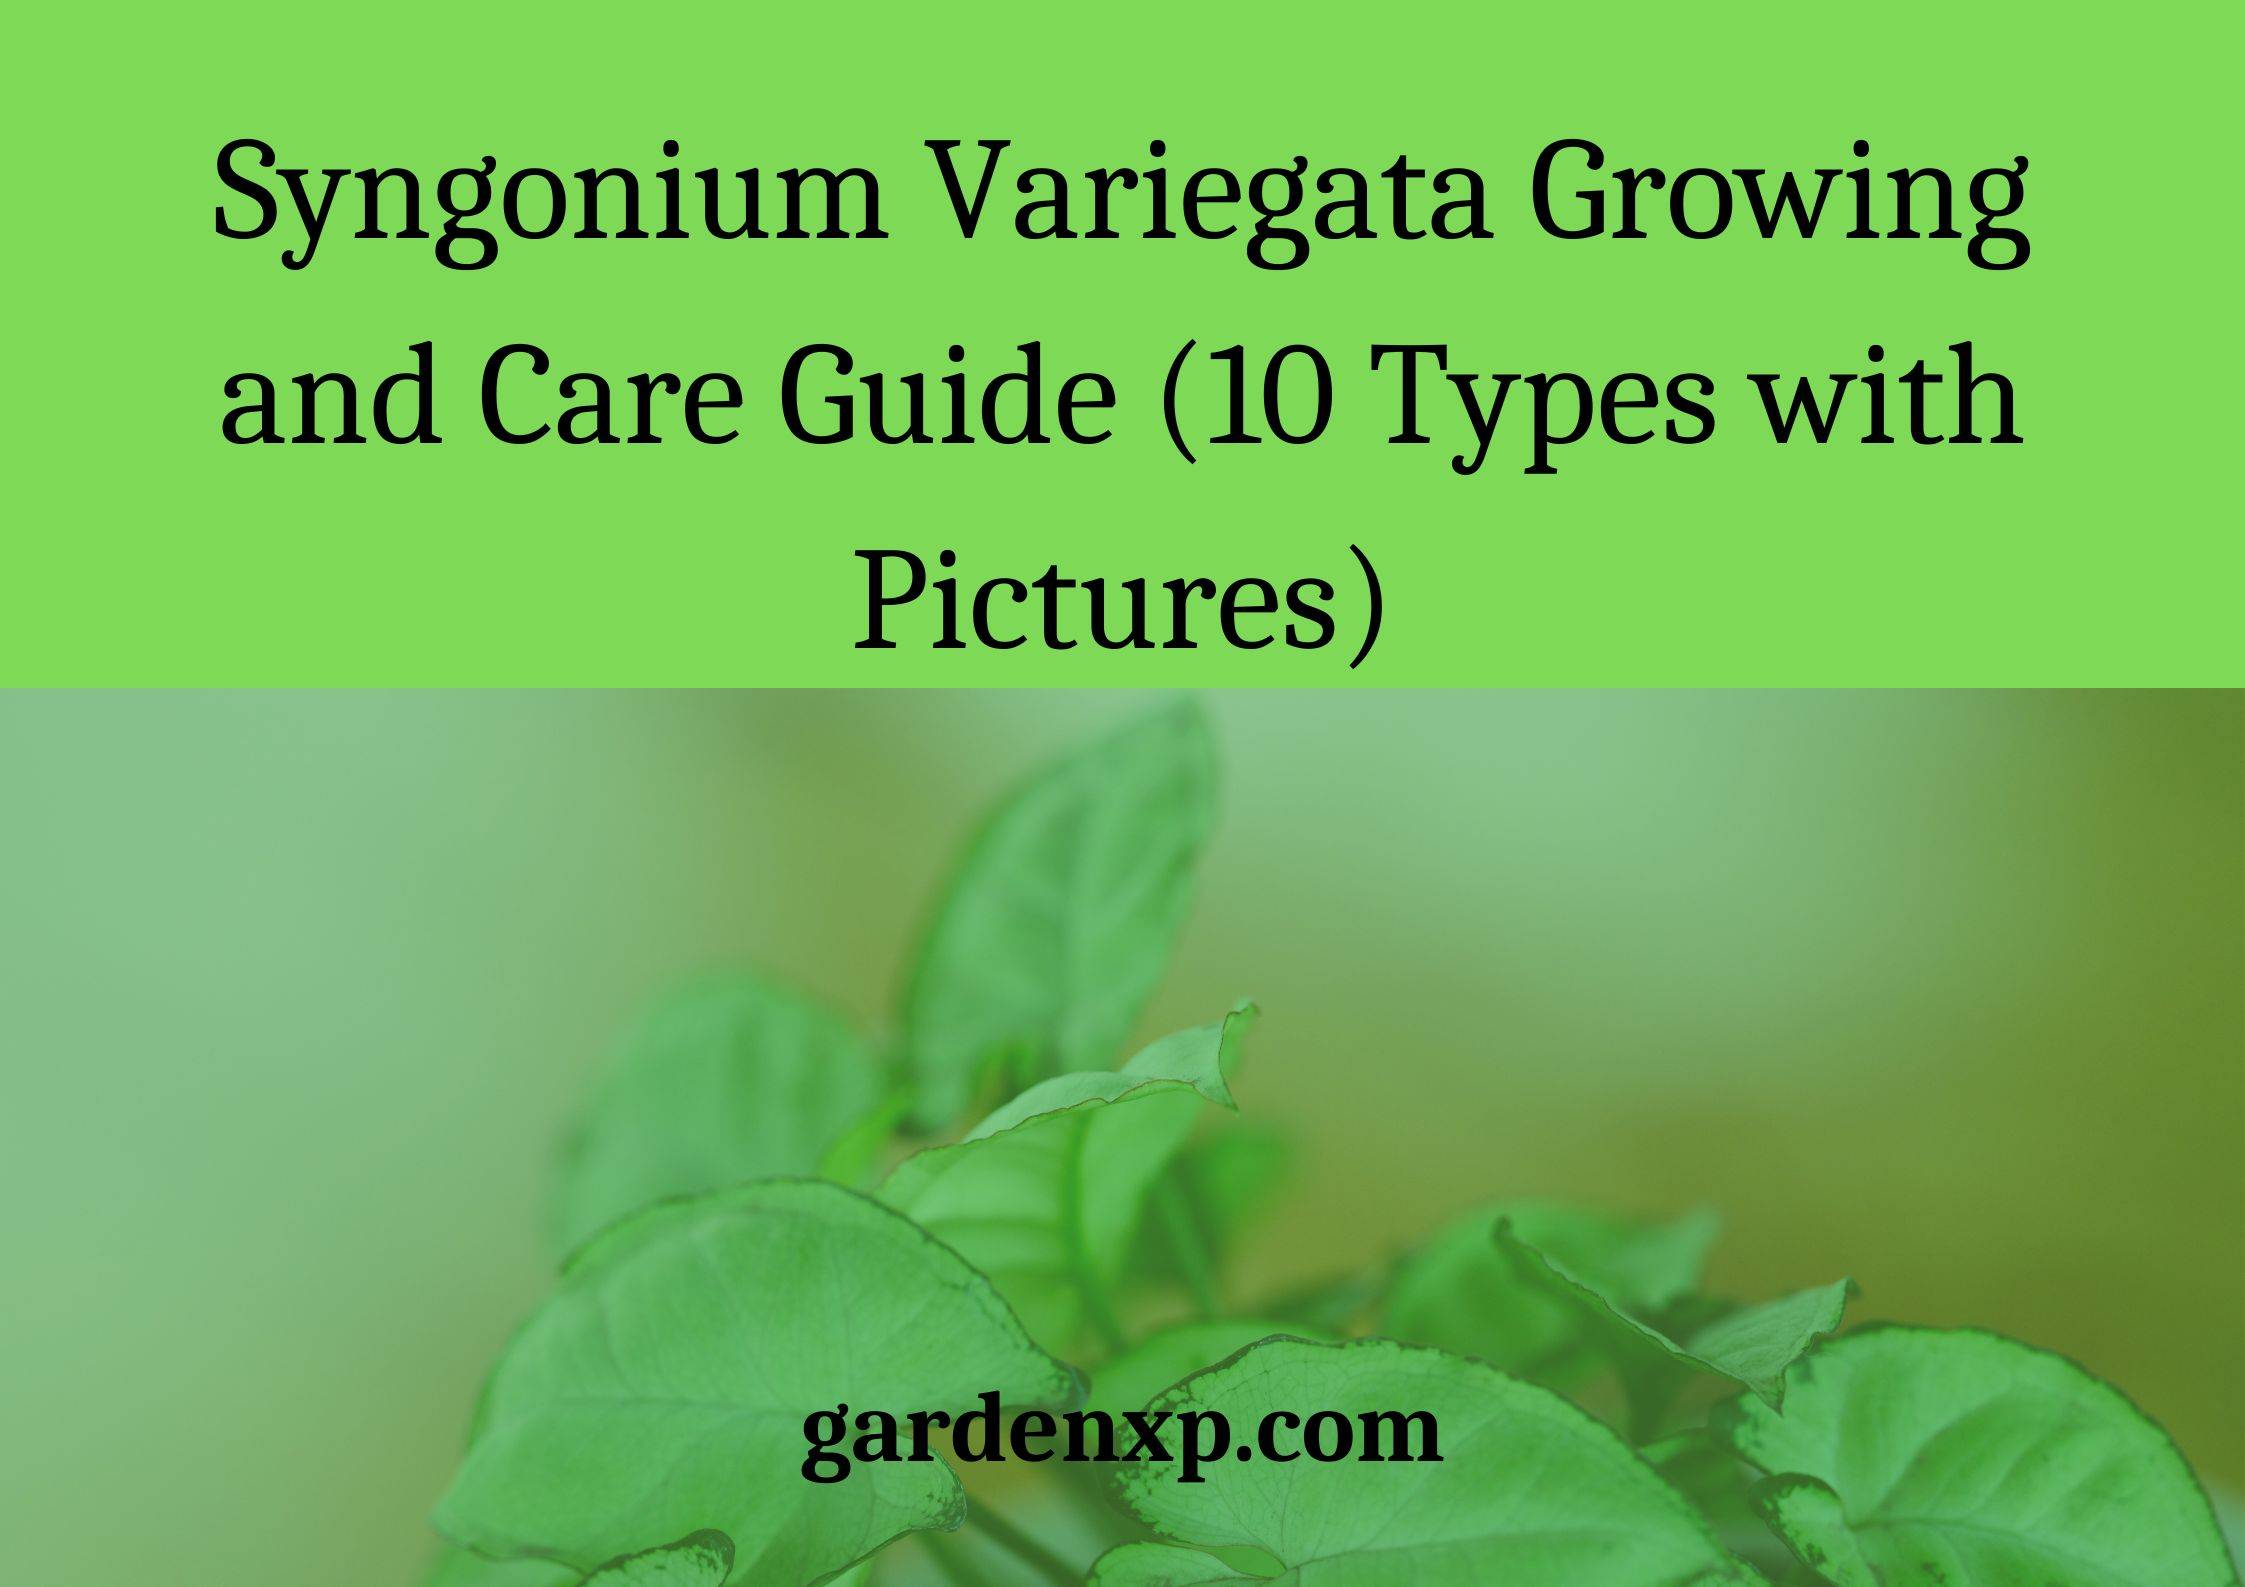 Syngonium Variegata Growing and Care Guide (10 Types with Pictures)